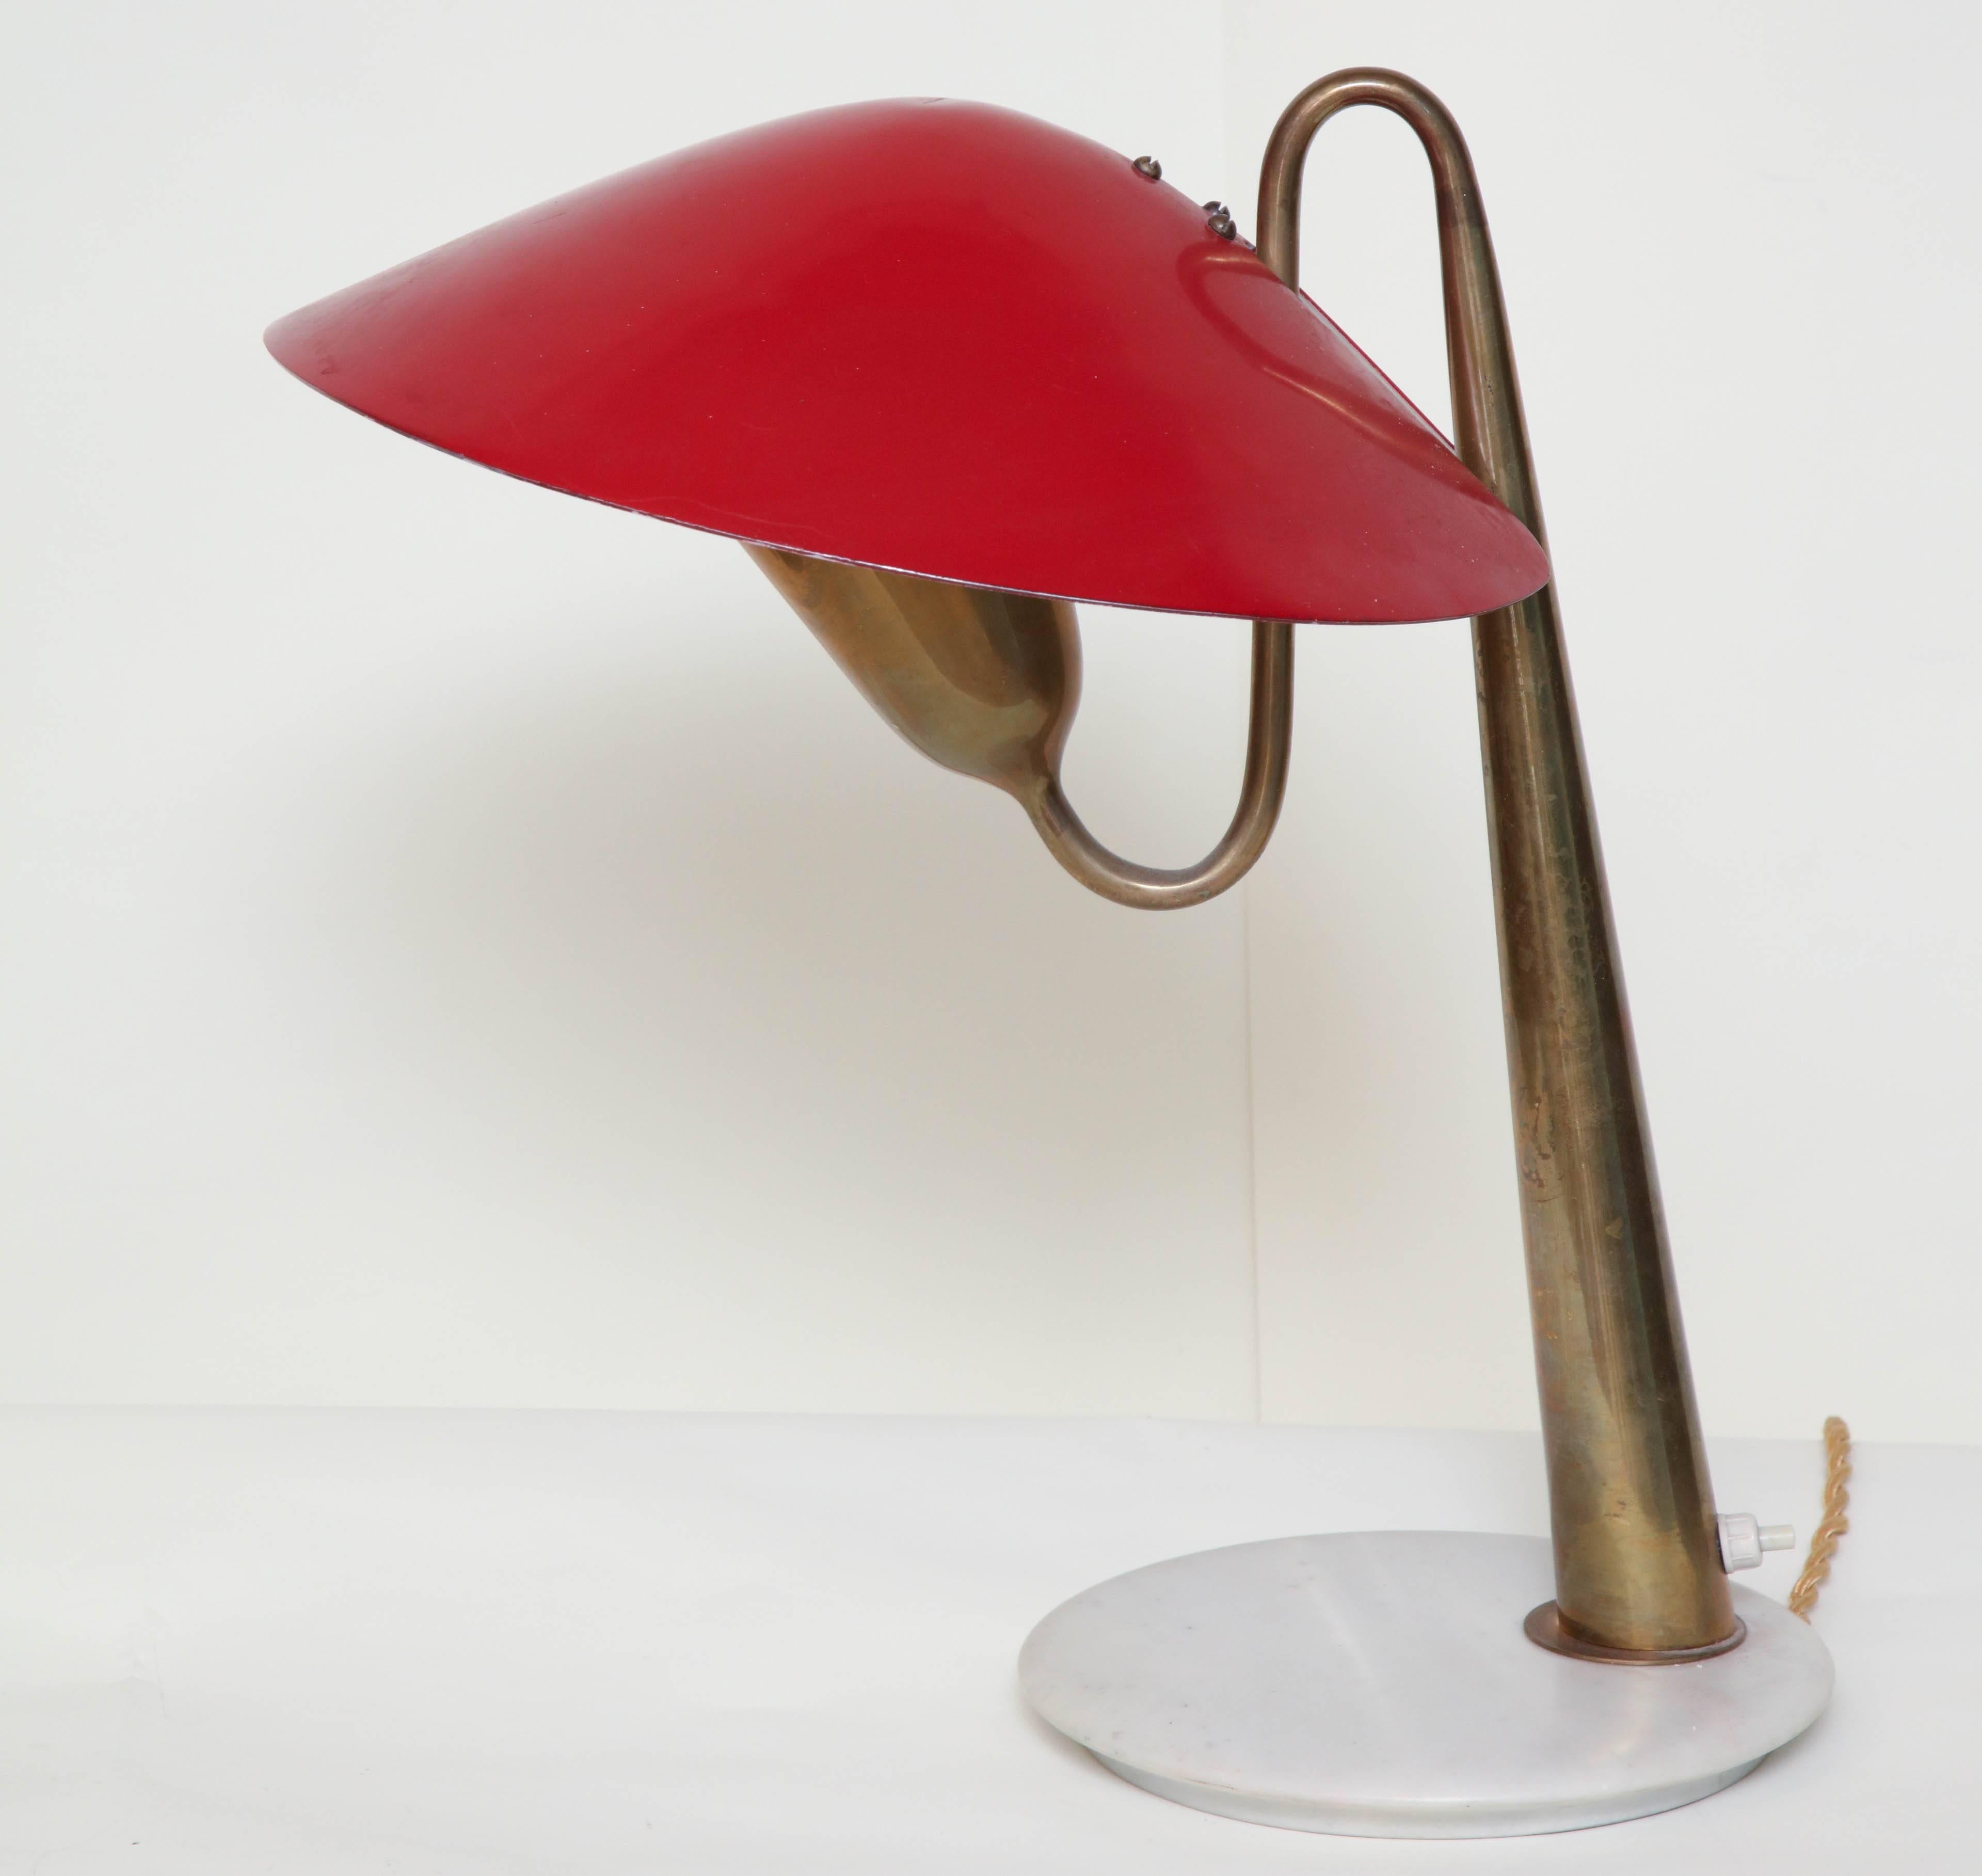 Table Lamp Articulated Mid Century Modern Italy 1950s
The sculptural form with unique shade adjustment. Rewired